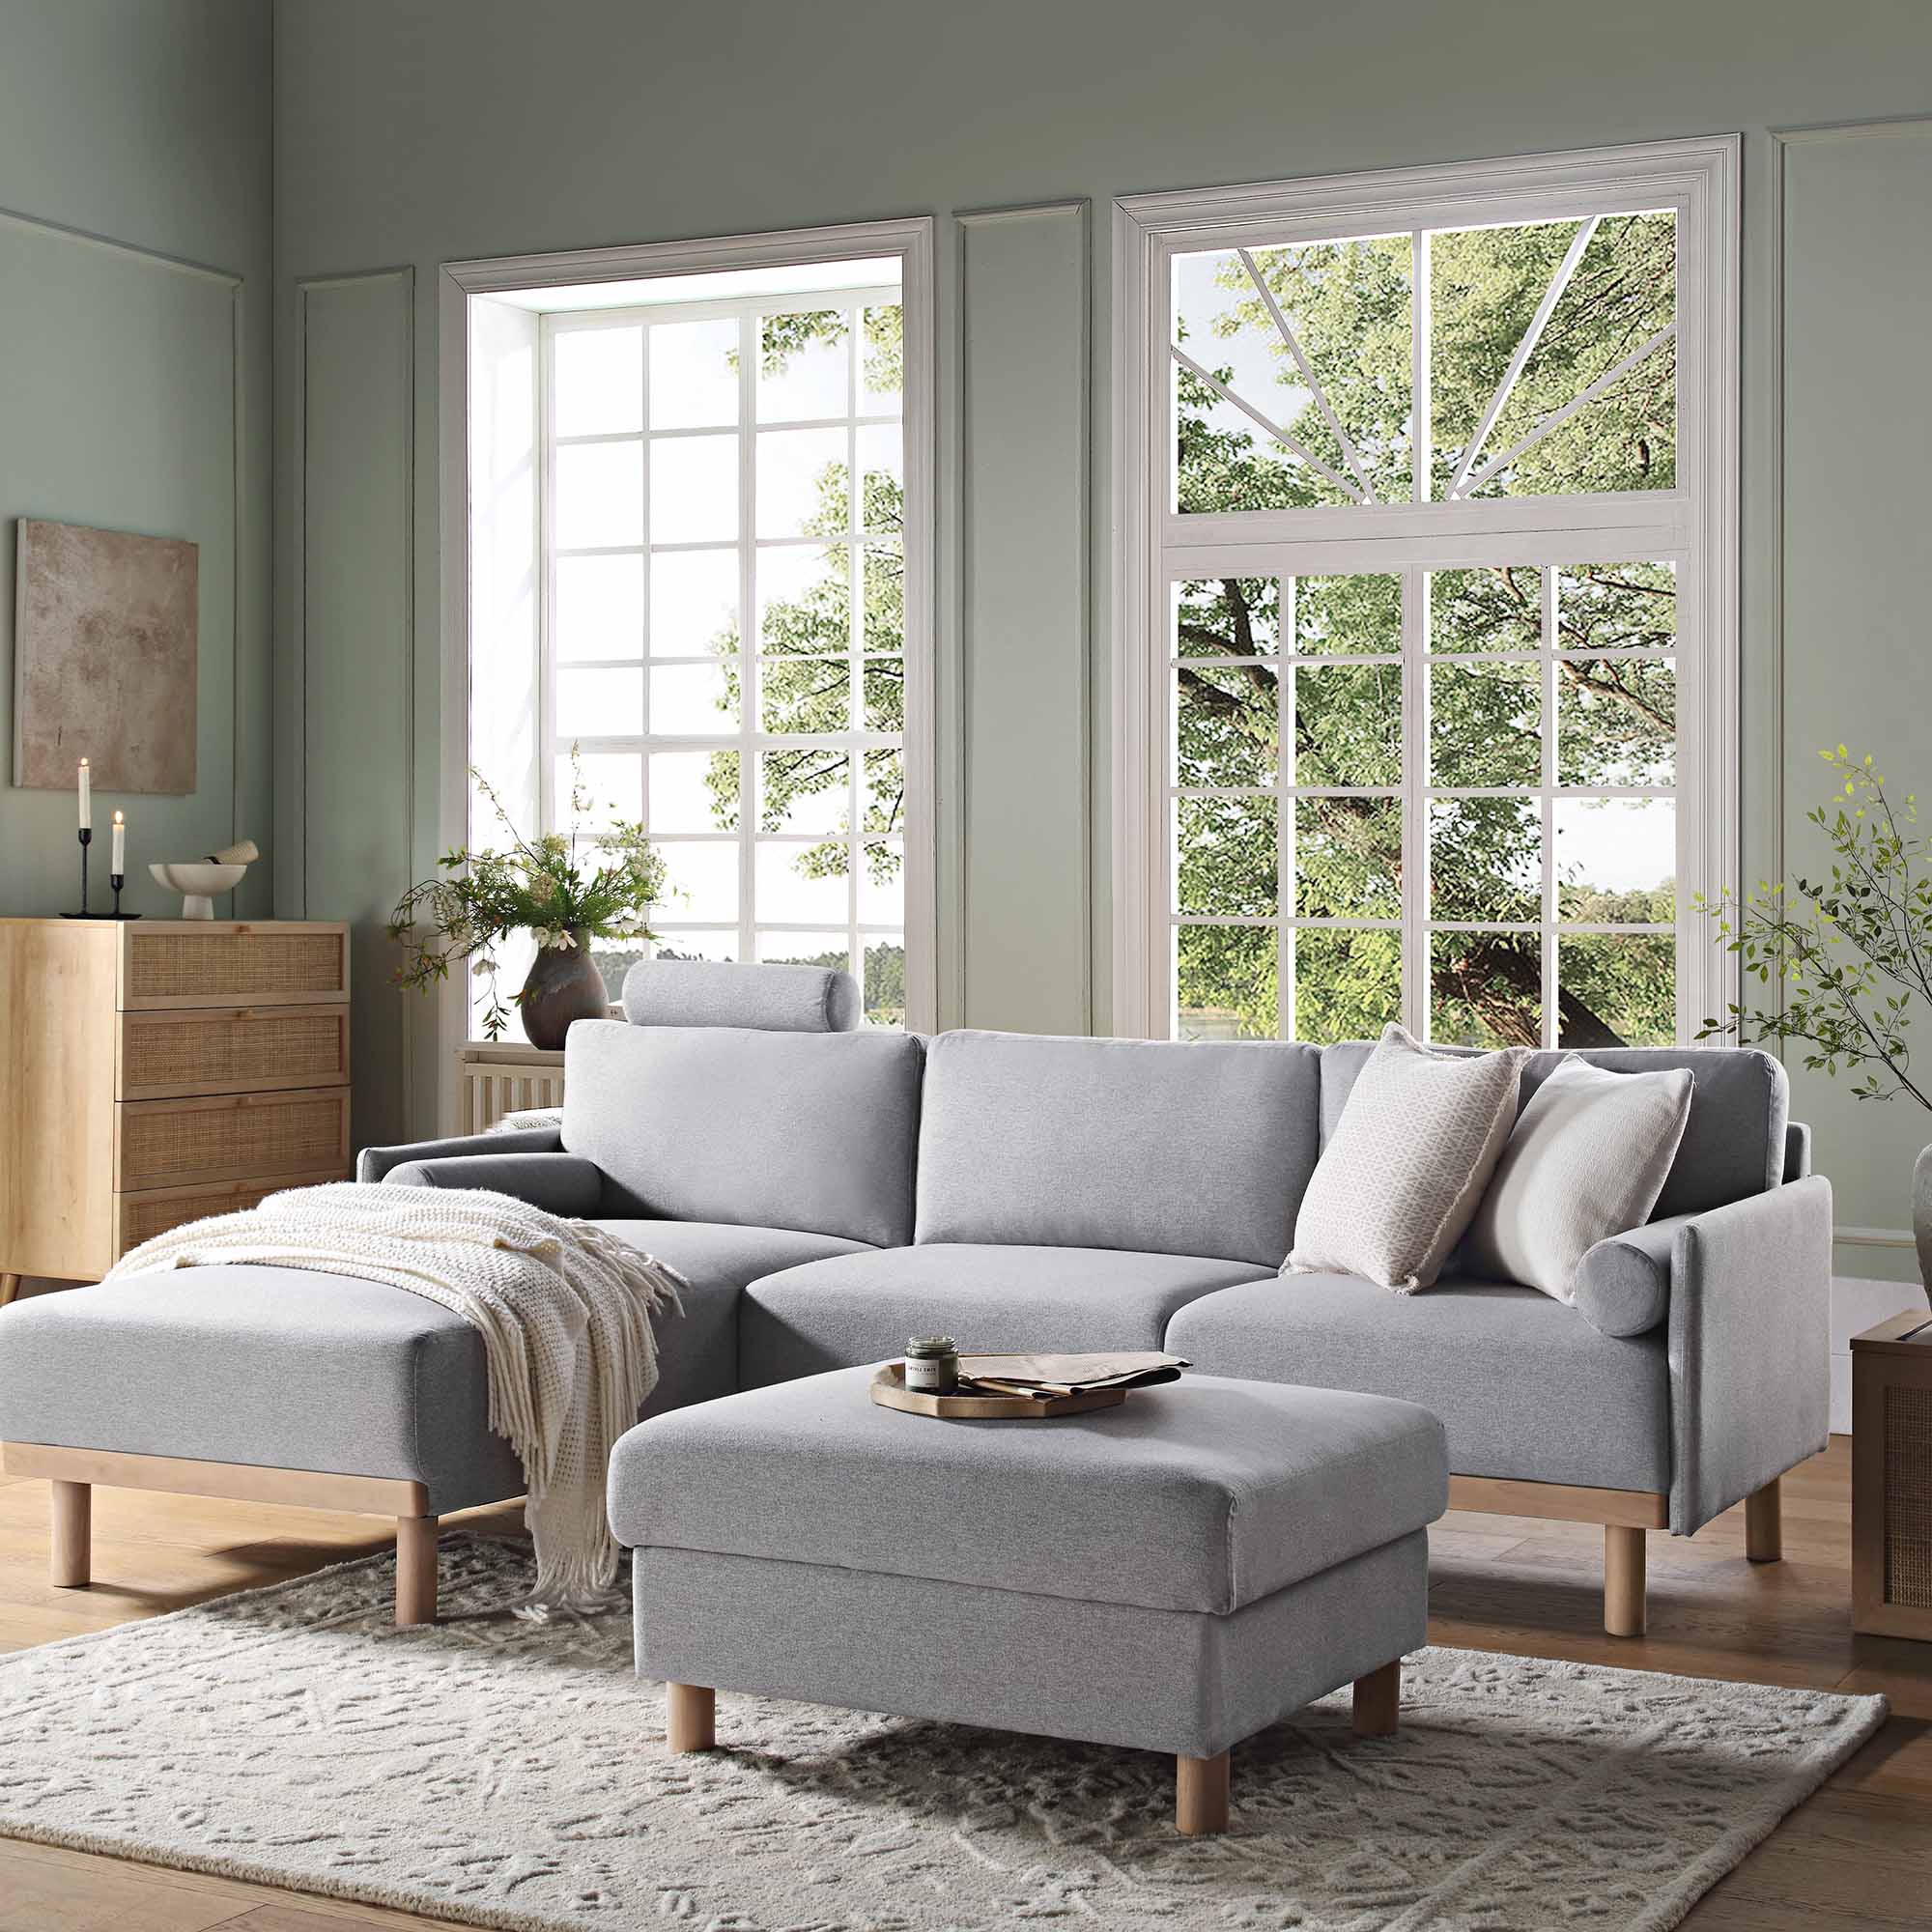 Timber Grey Marl Fabric Sofa, Large 3-Seater Chaise Sofa Left Hand